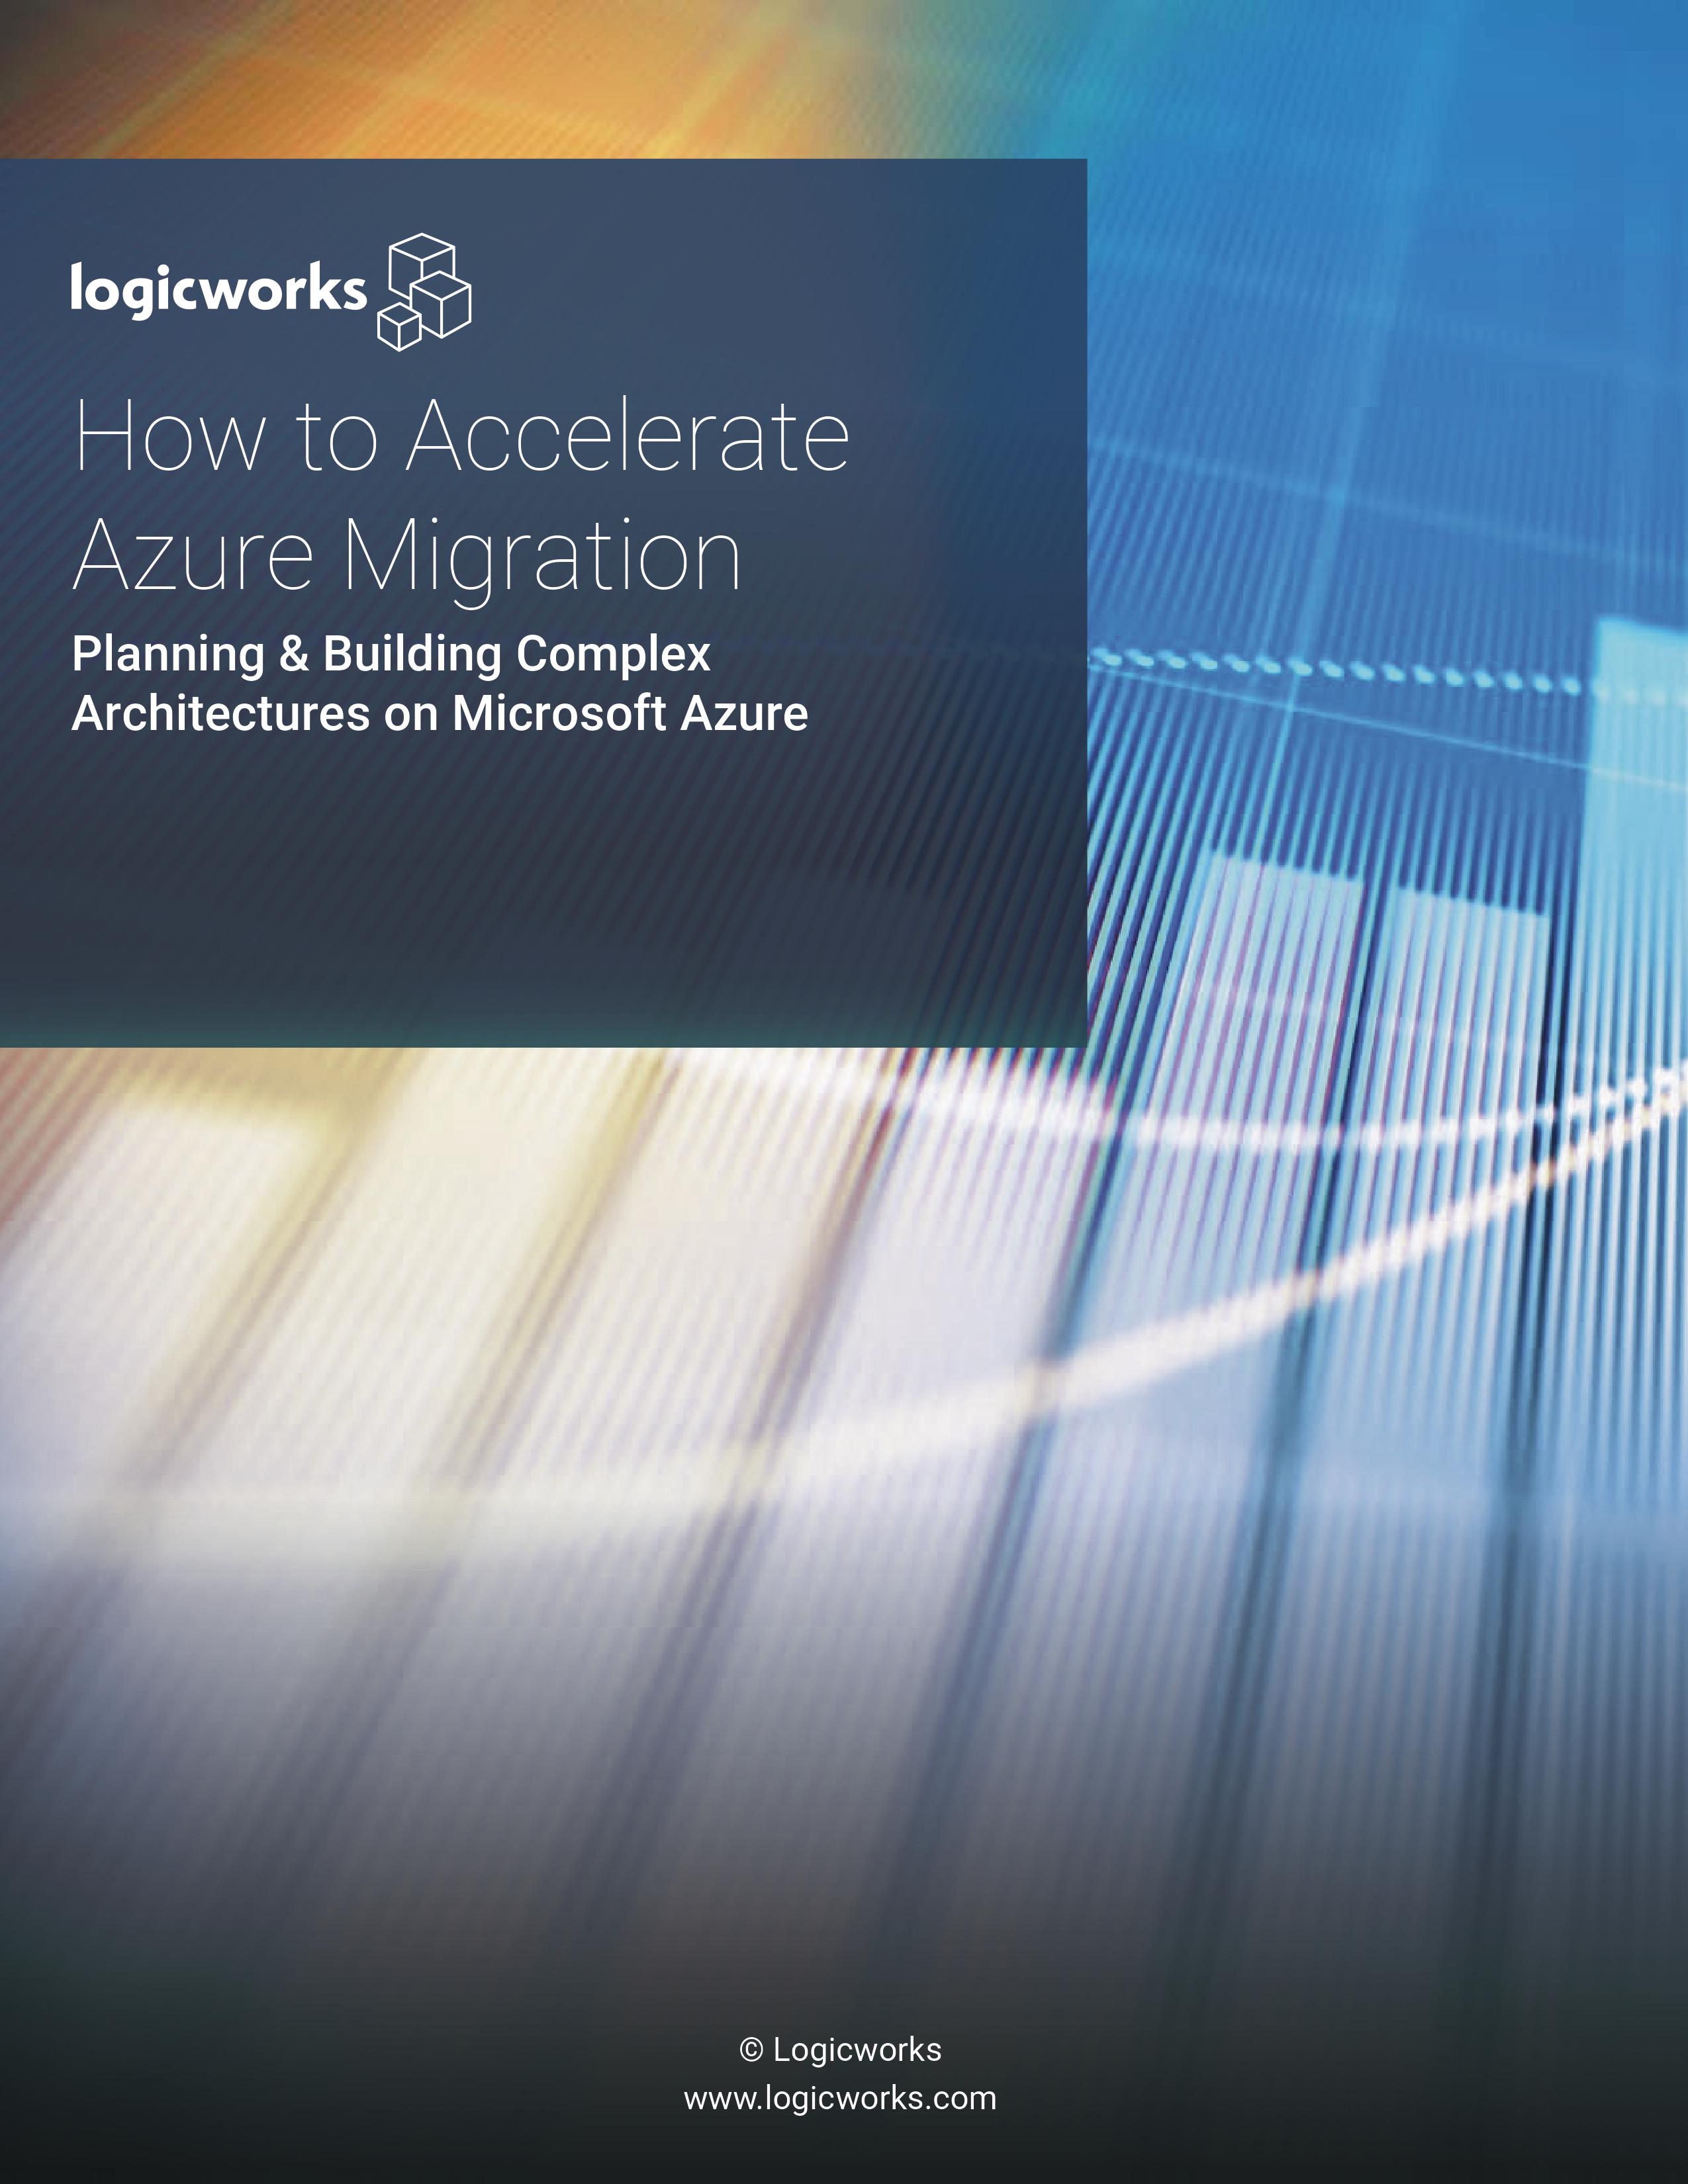 How to Accelerate Azure Migration (Cover)